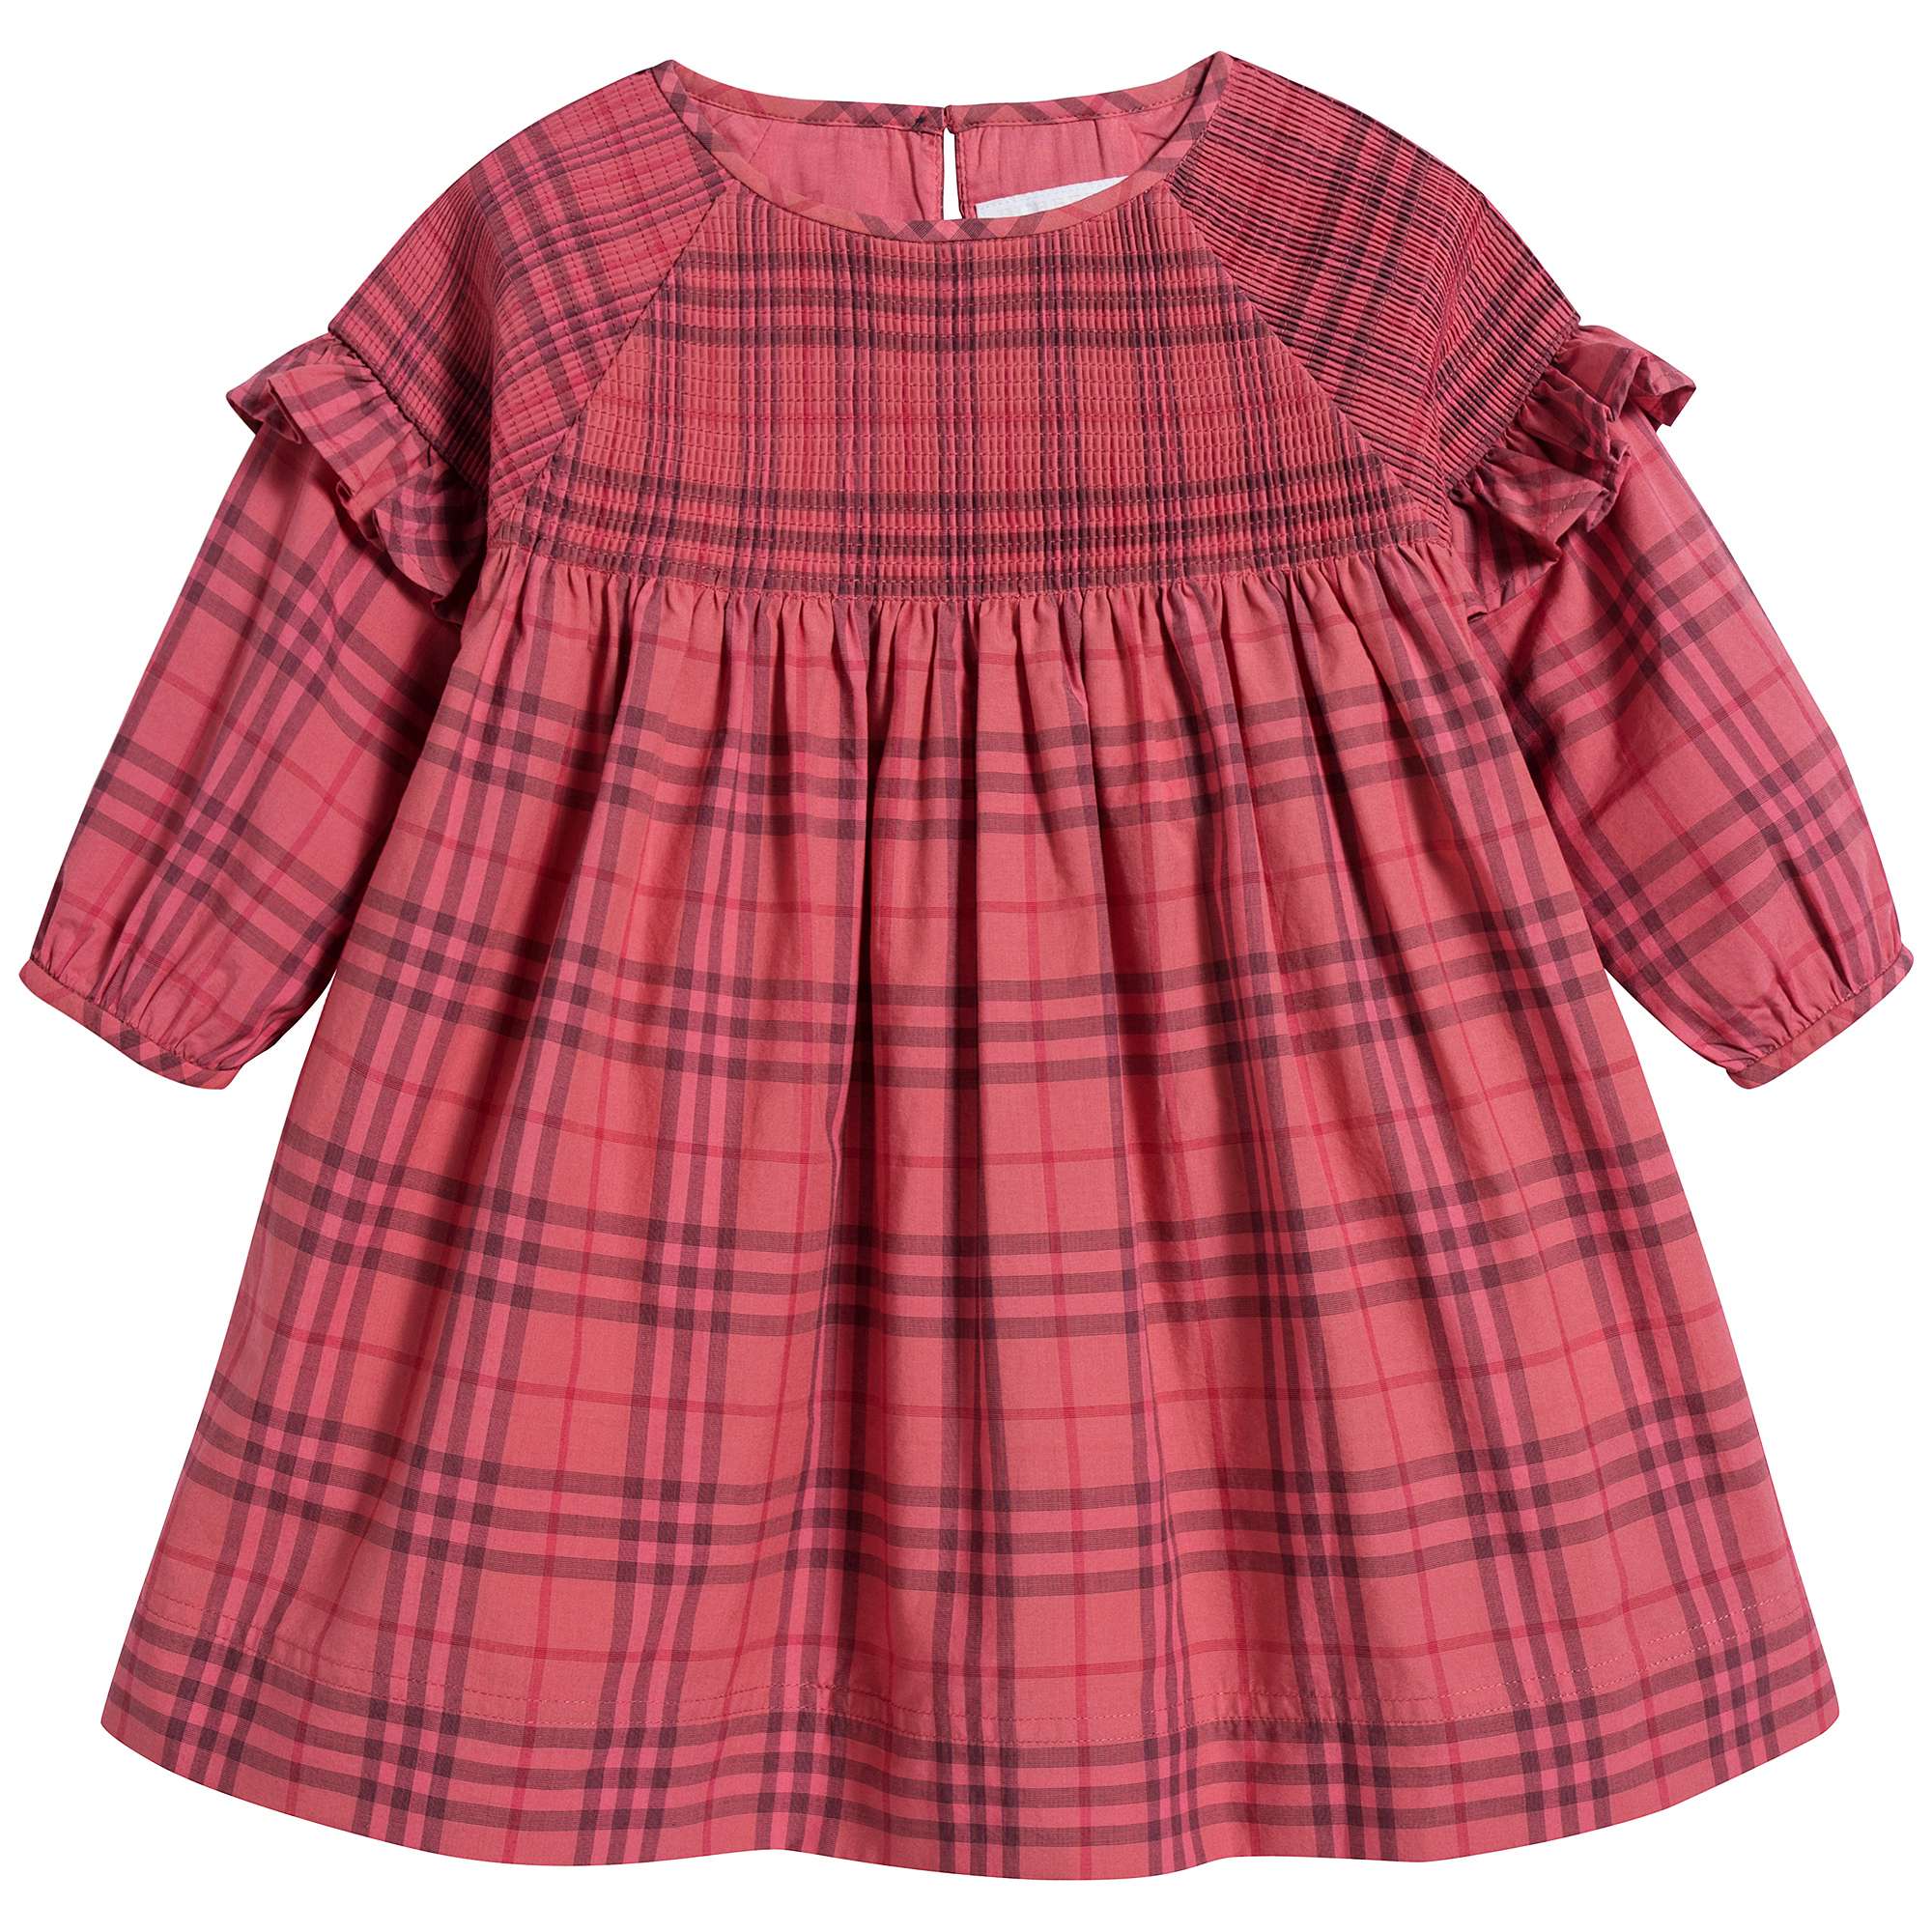 Baby Girls Coral Red Cotton Dress